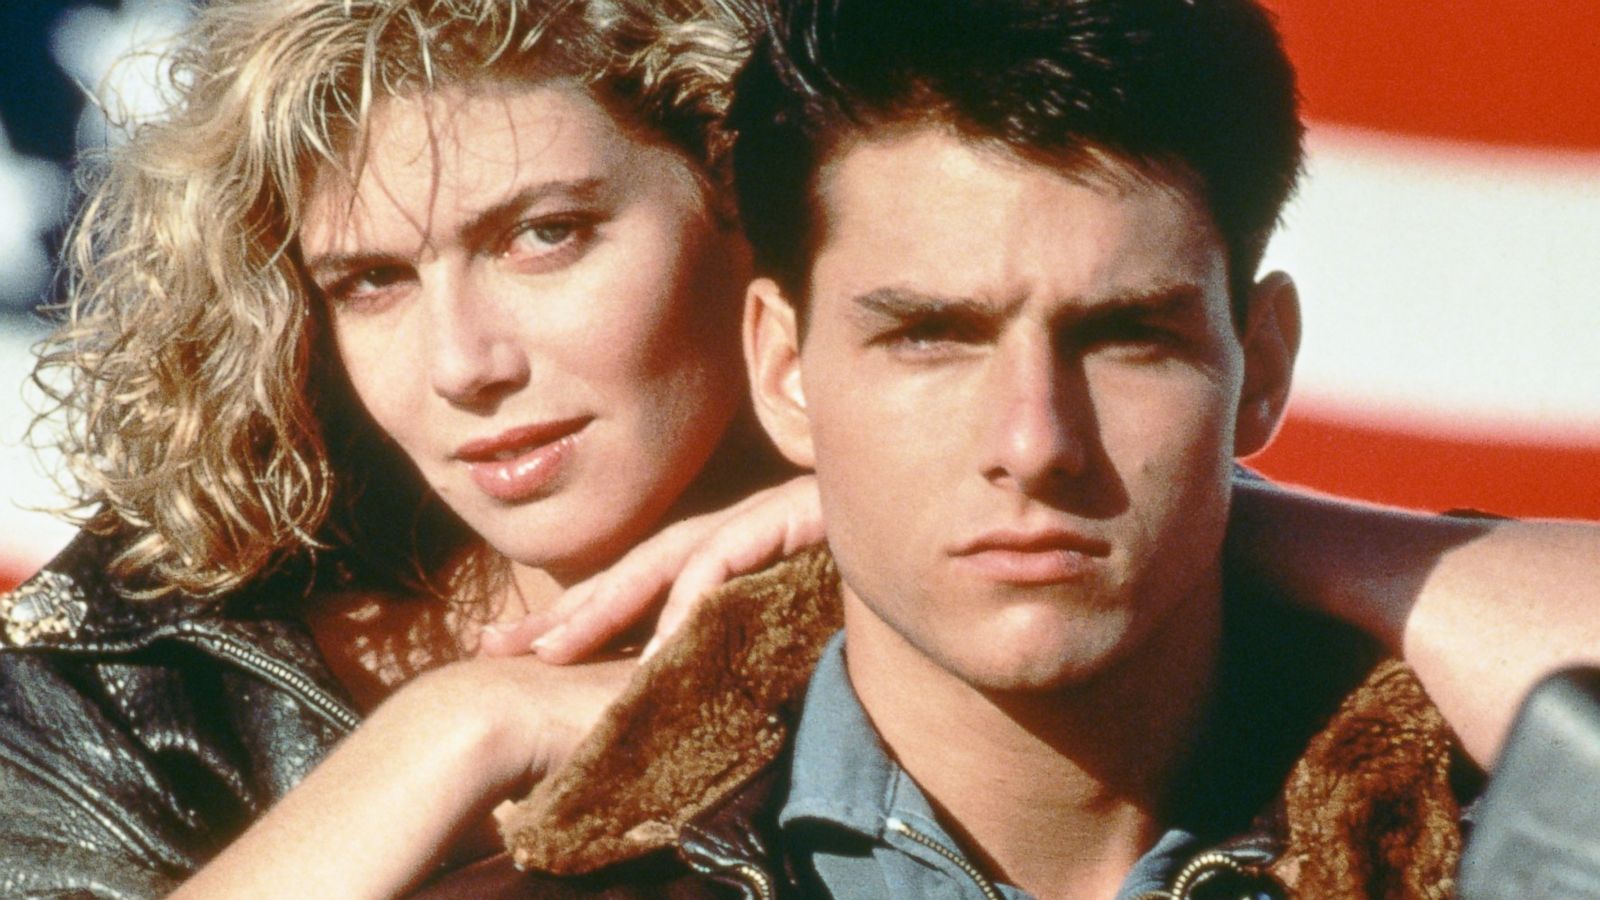 5 Ways 'Top Gun' Changed the Movie Industry and Society - ABC News